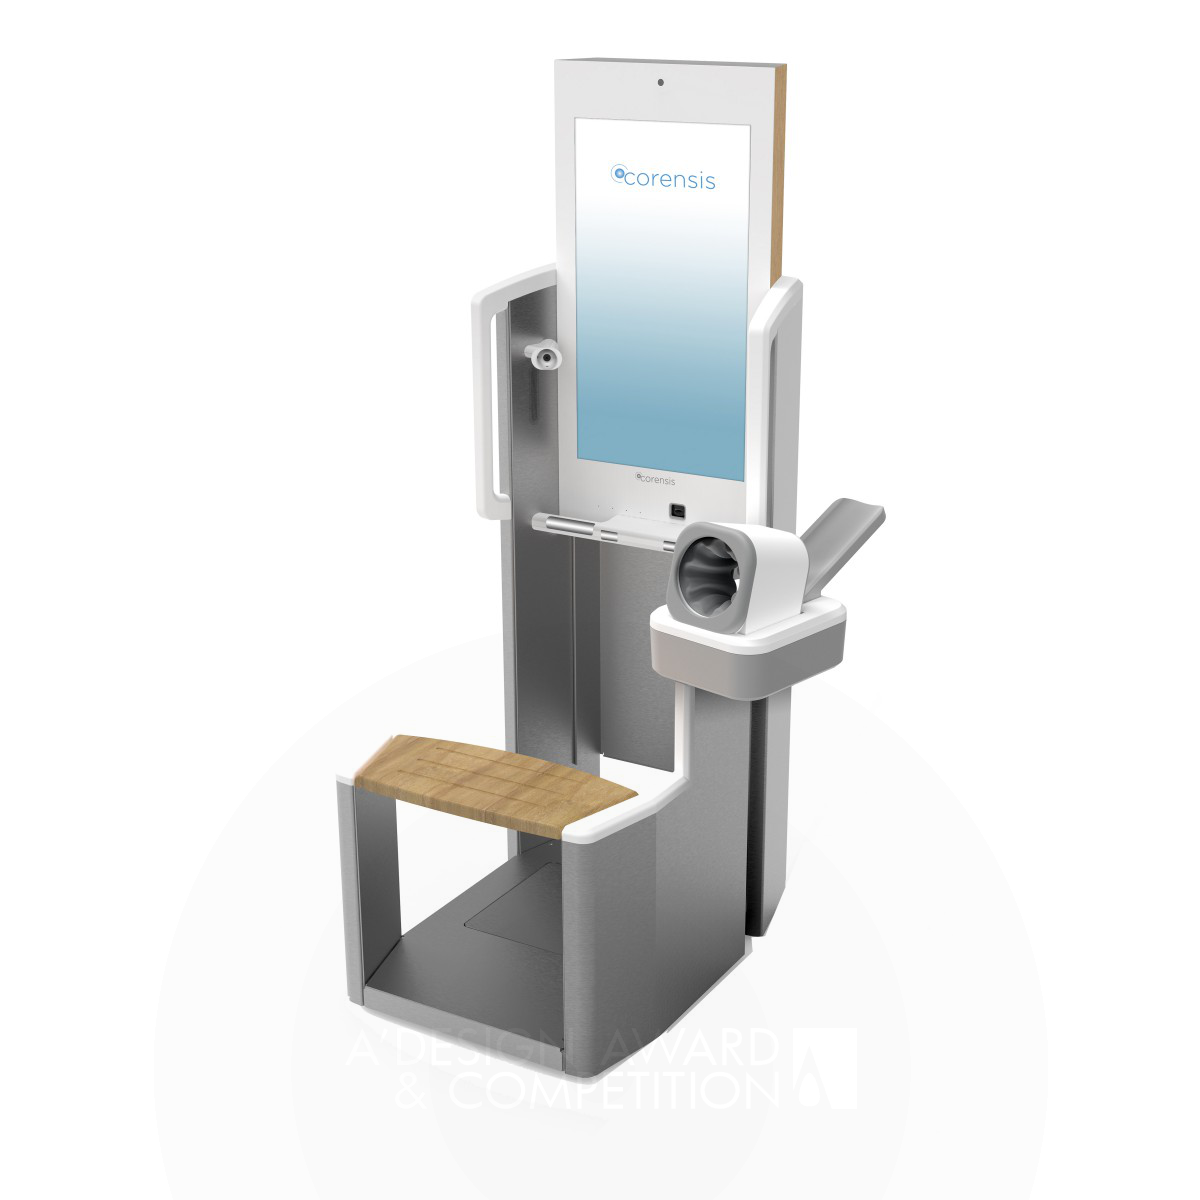 Arcelik Innovation Team wins Bronze at the prestigious A' Medical Devices and Medical Equipment Design Award with Corensis Medical Kiosk.